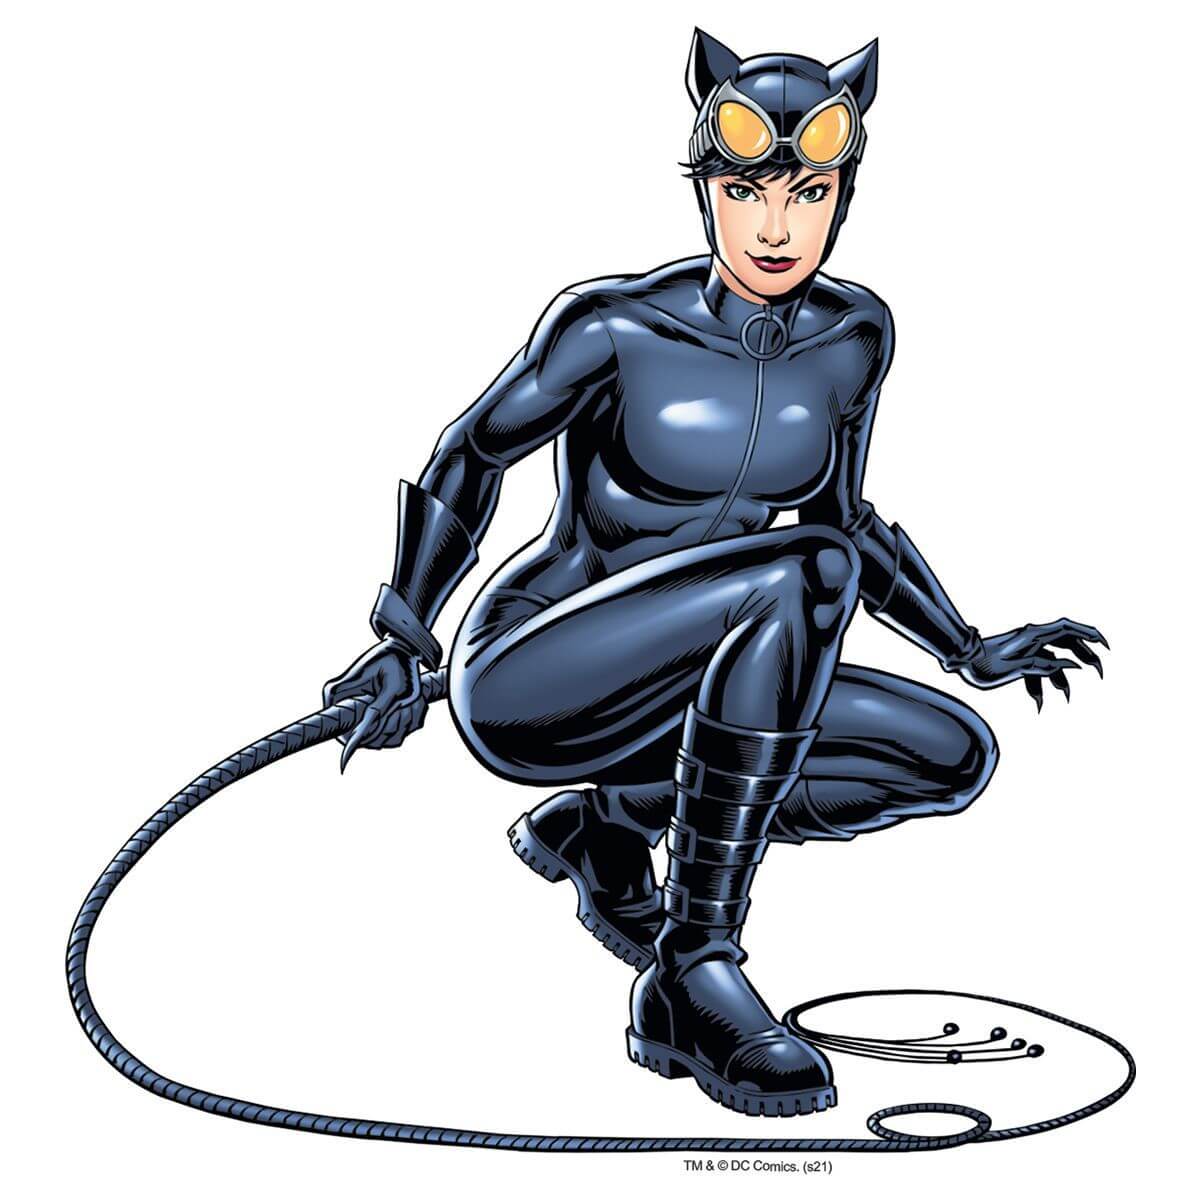 Kismet Decals Catwoman Bullwhip Licensed Wall Sticker - Easy DIY Justice League Home & Room Decor Wall Art - Kismet Decals